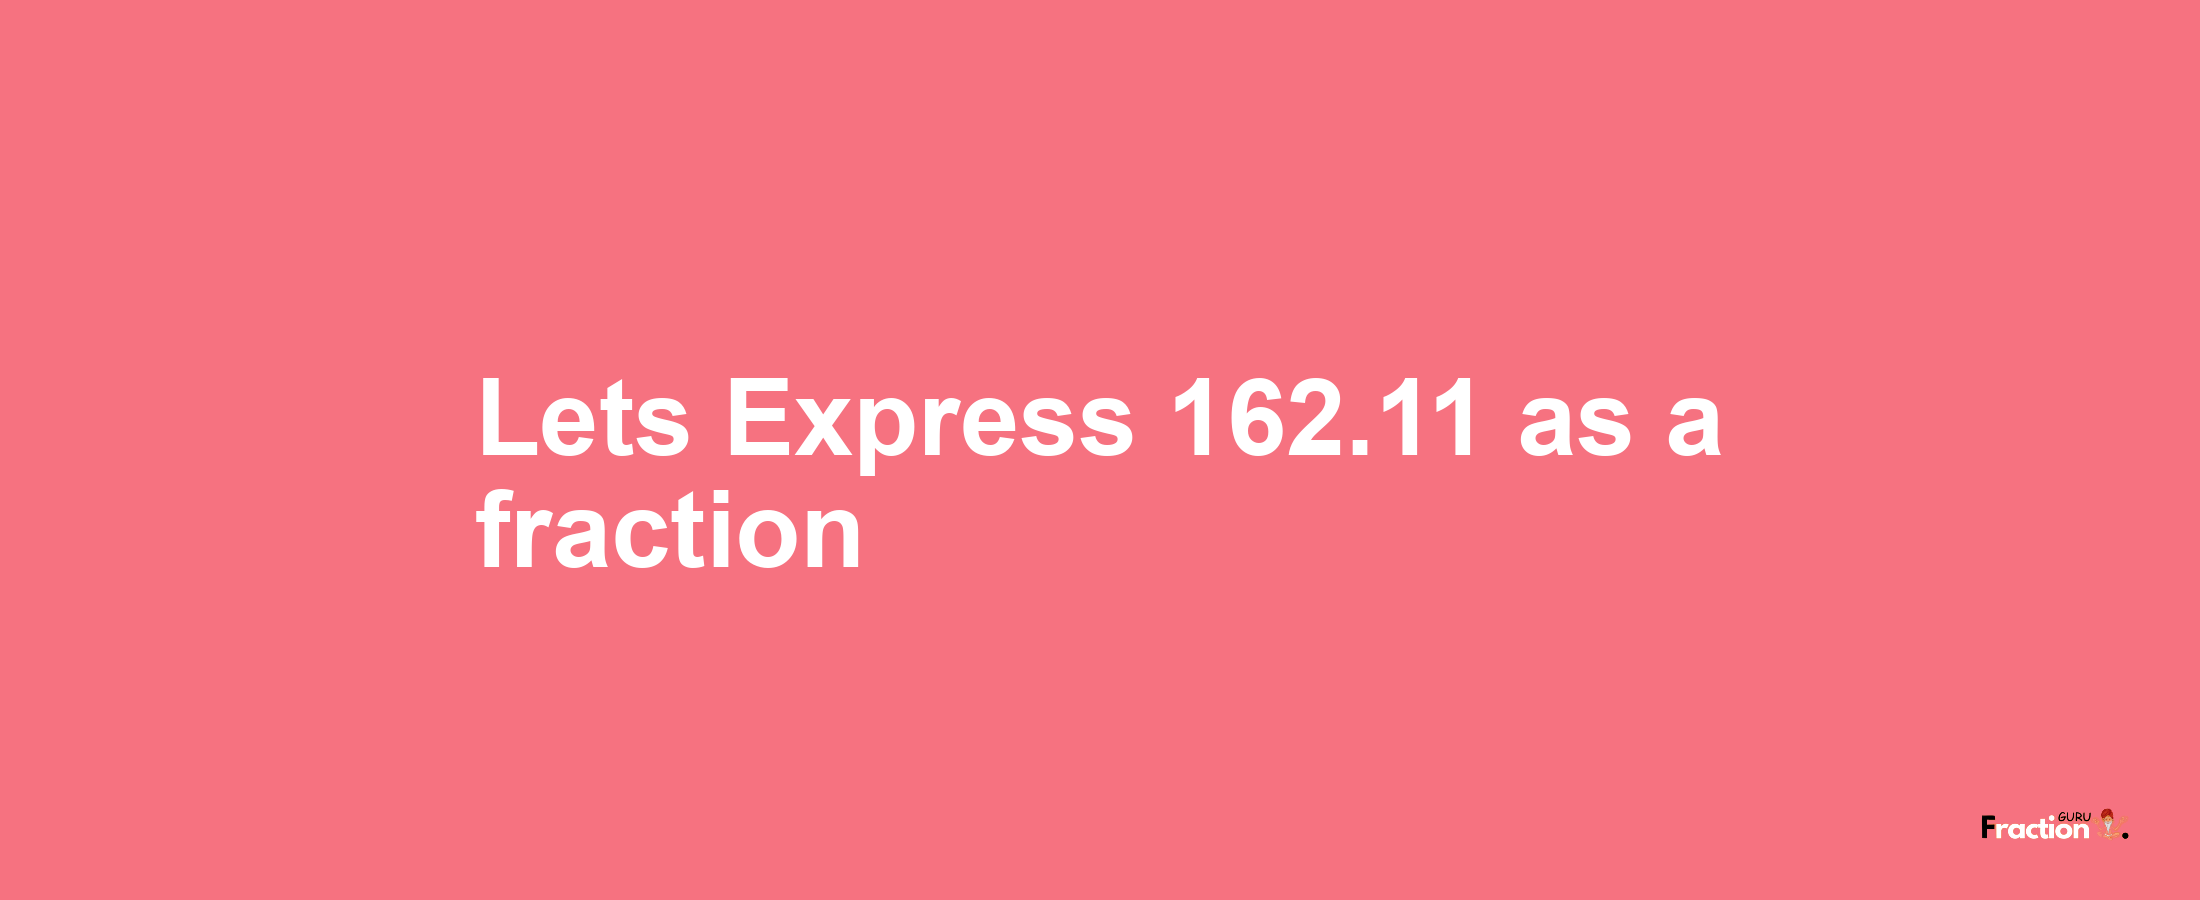 Lets Express 162.11 as afraction